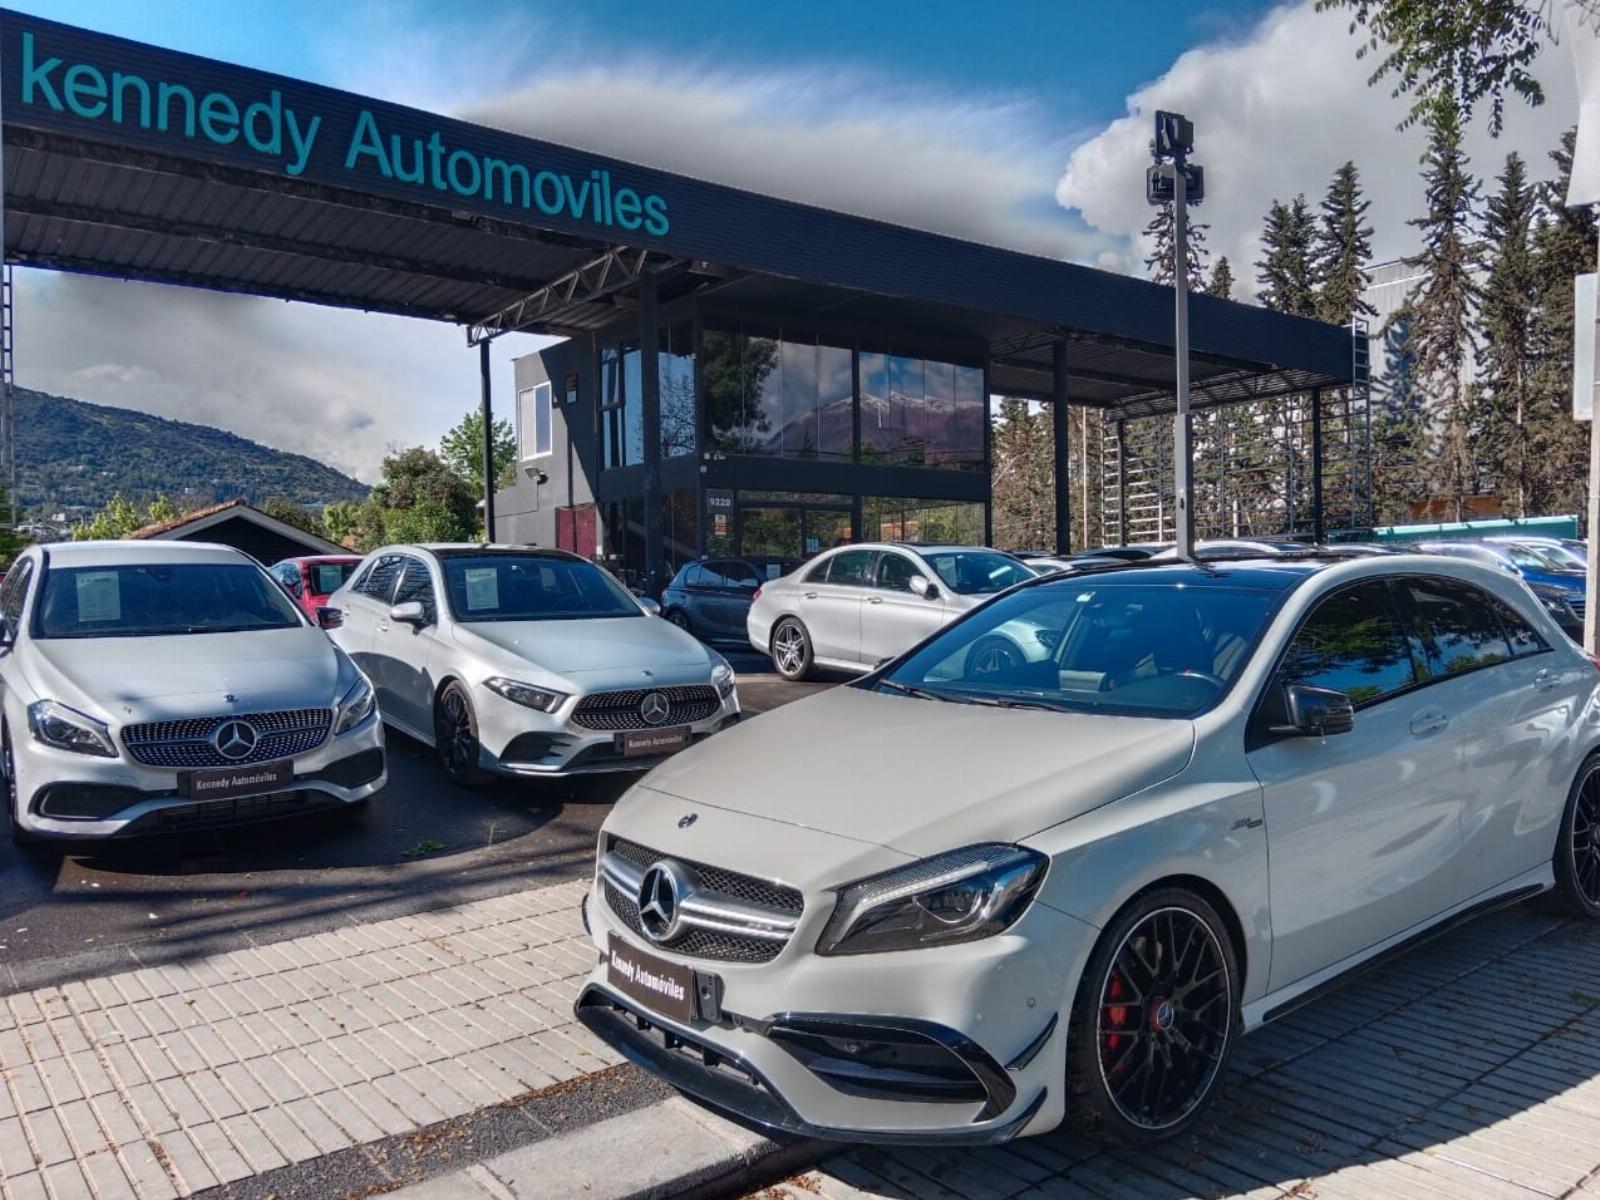 MERCEDES-BENZ A45 2.0 A45 AMG AUTO 4MATIC 2018 Impecable - KENNEDY AUTOMOVILES